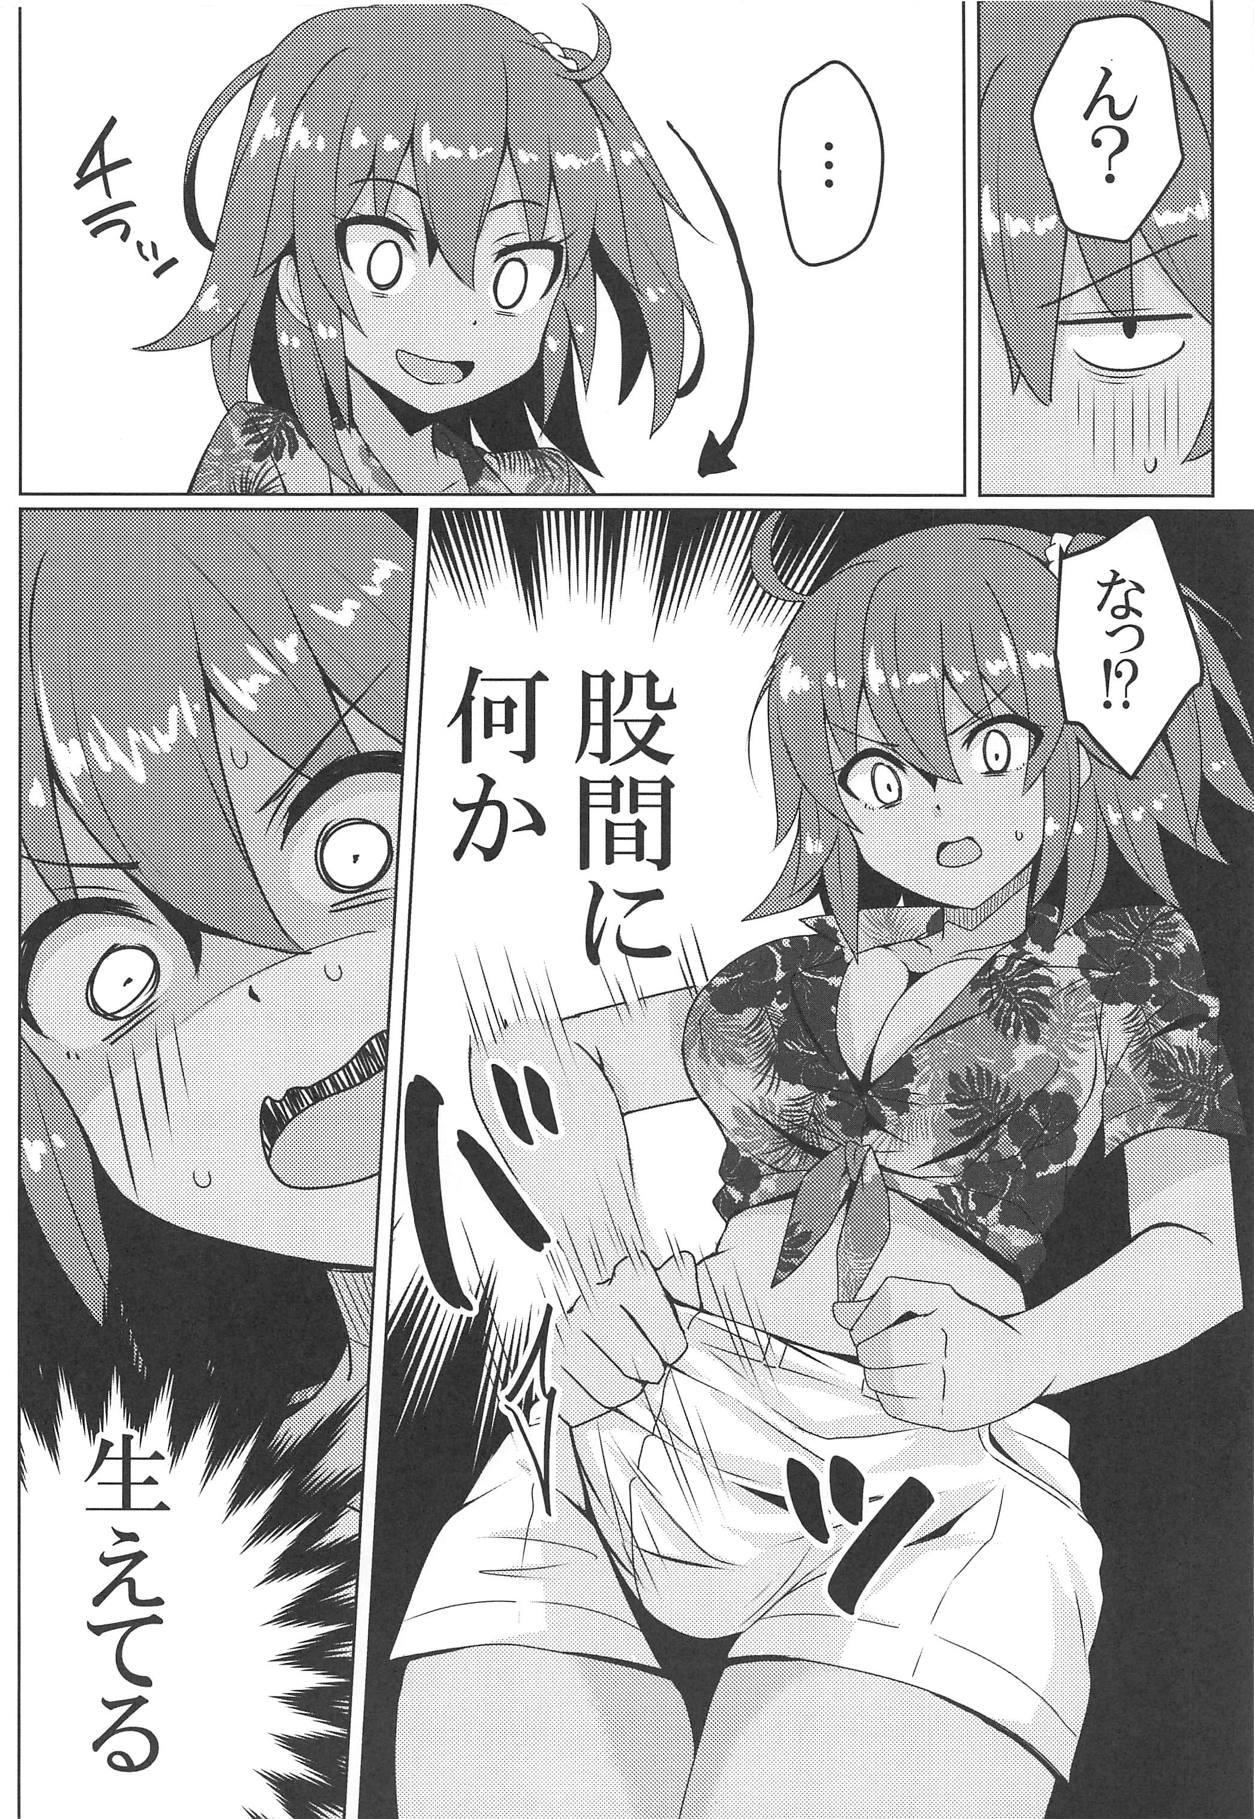 Mature Woman Summer Night Trouble Girl - Fate grand order Stroking - Page 5